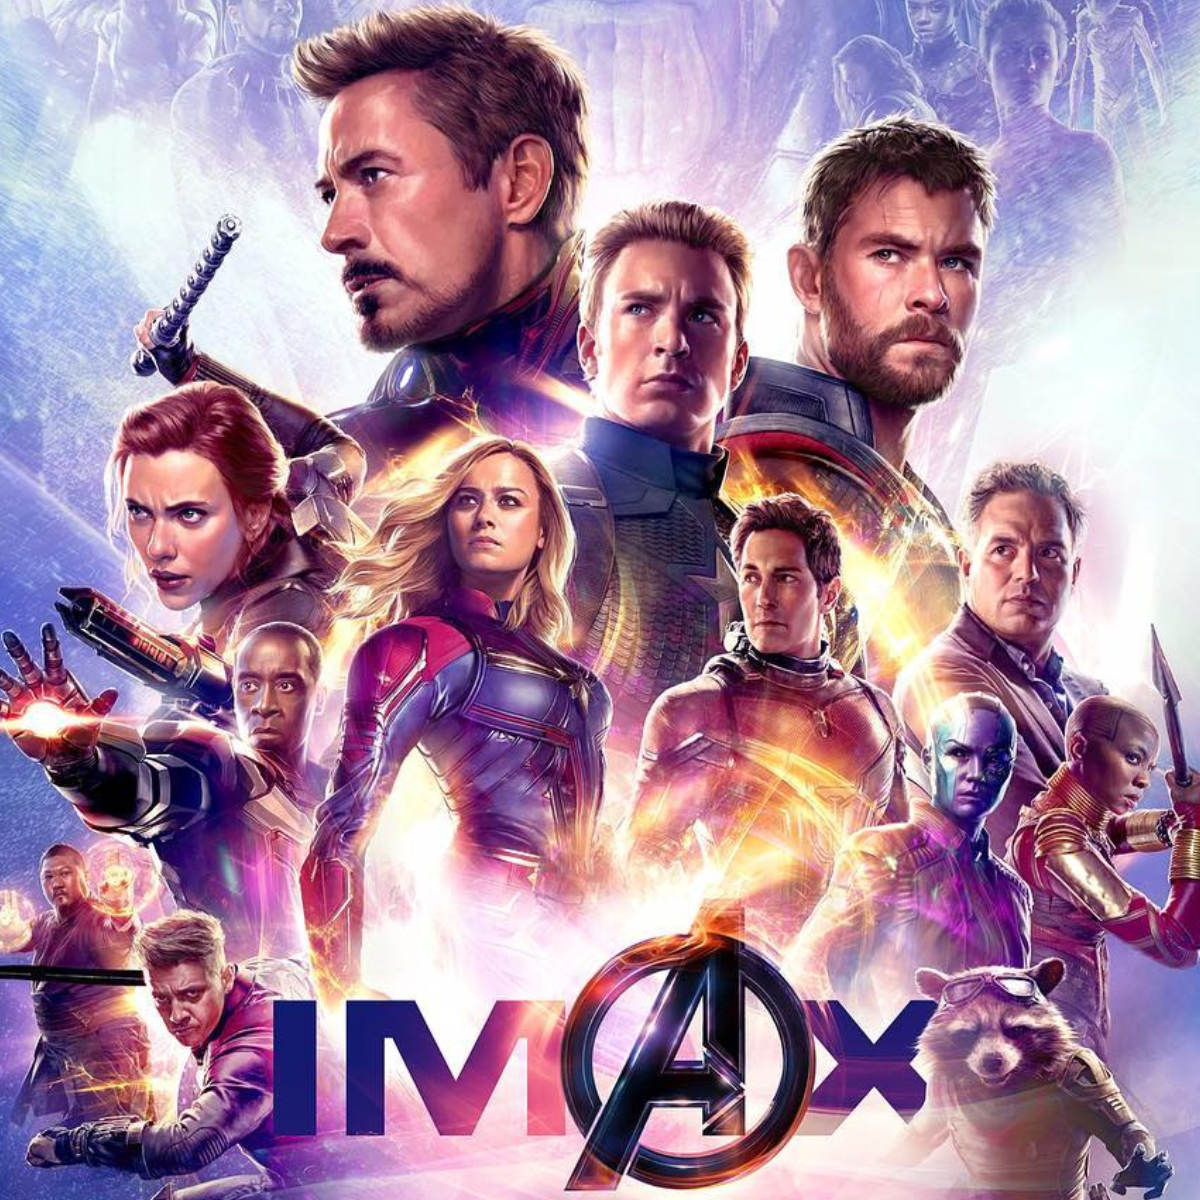 Avengers: Endgame Box Office Collection North America: The huge amount earned by the film will blow your mind